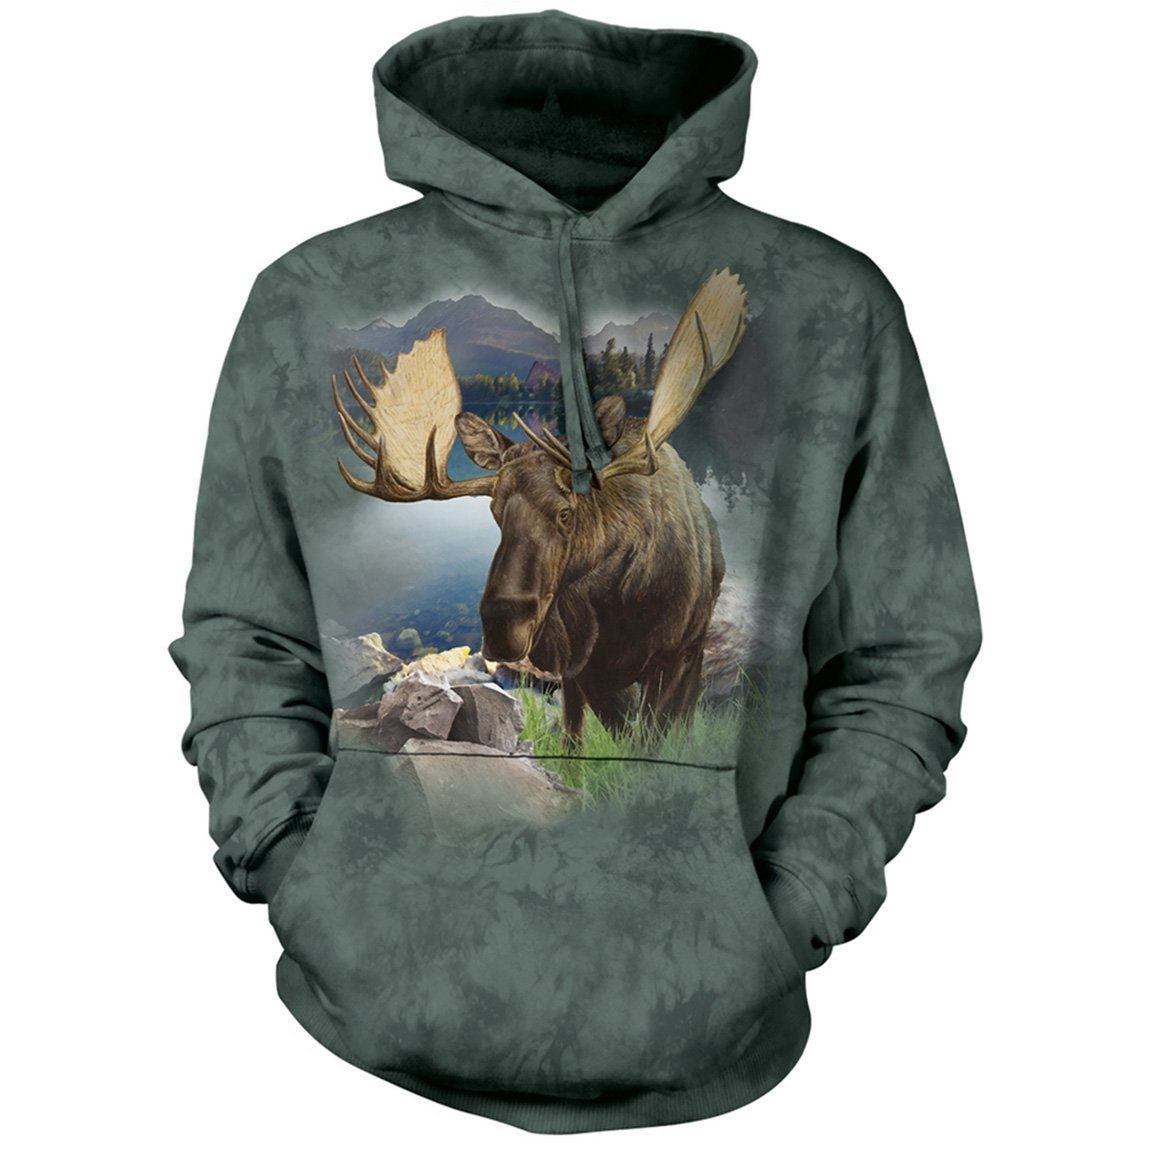 The Mountain Monarch Of The Forest - Hoodie Sweatshirt